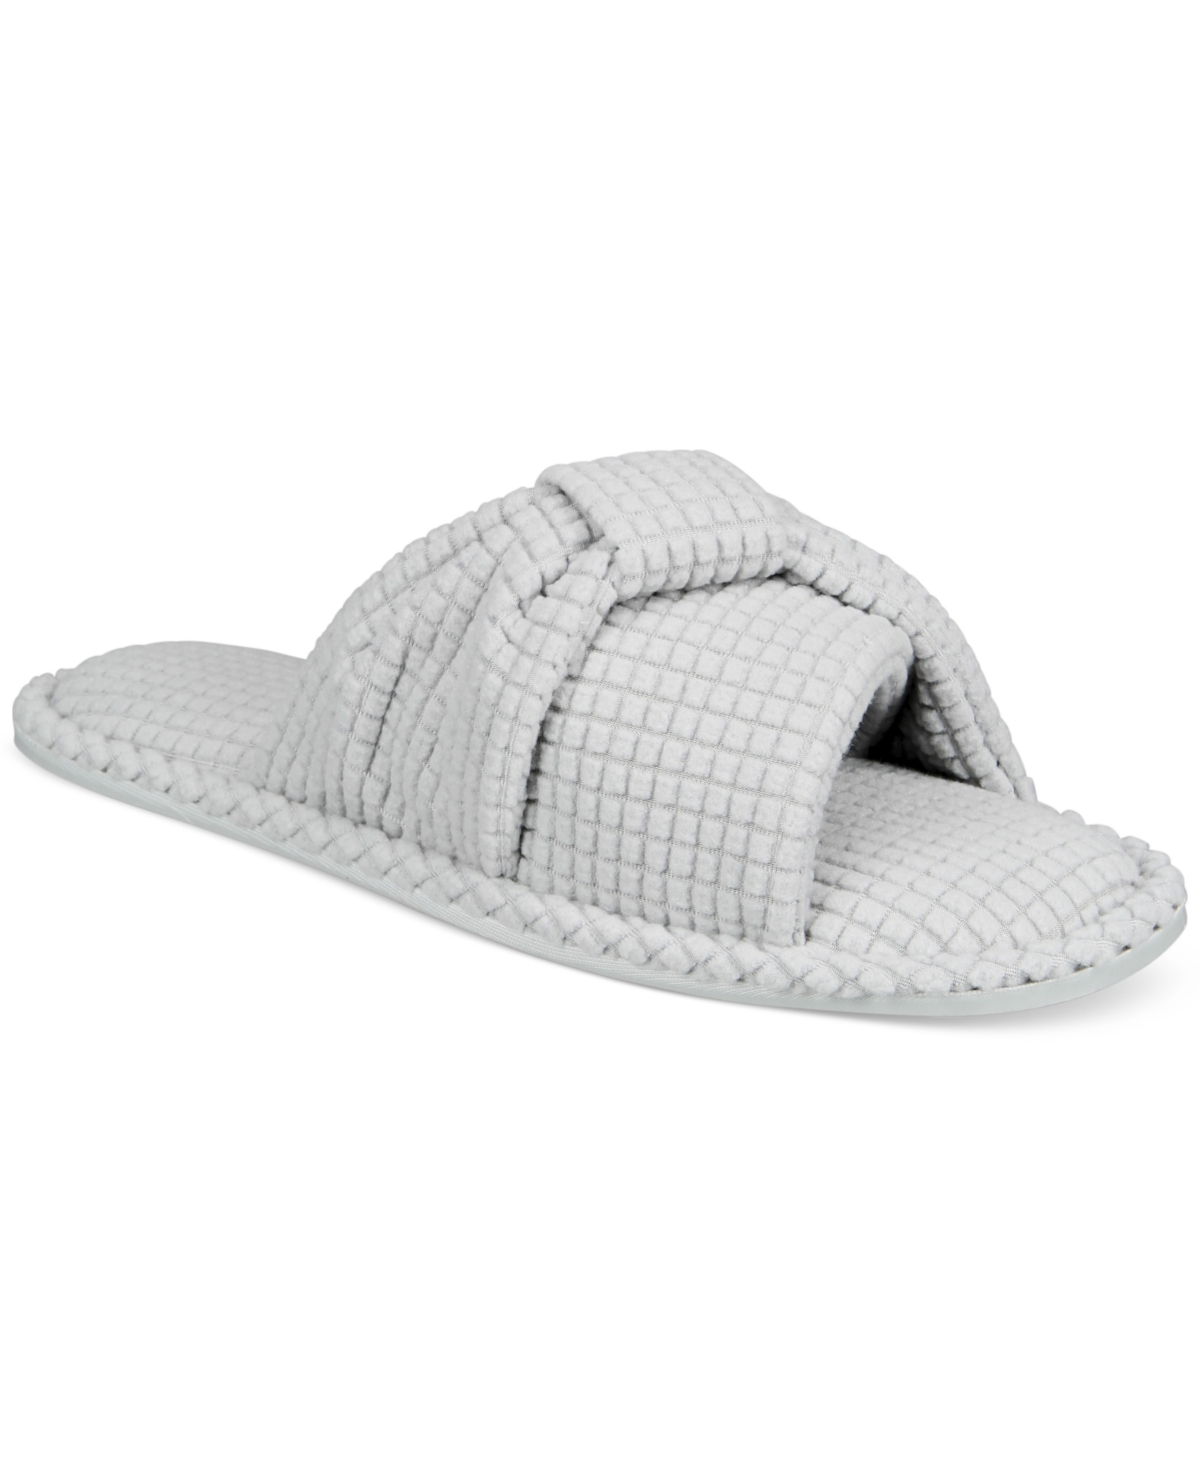 Women's Textured Knot-Top Slippers, Created for Macy's - Crystallin Blue